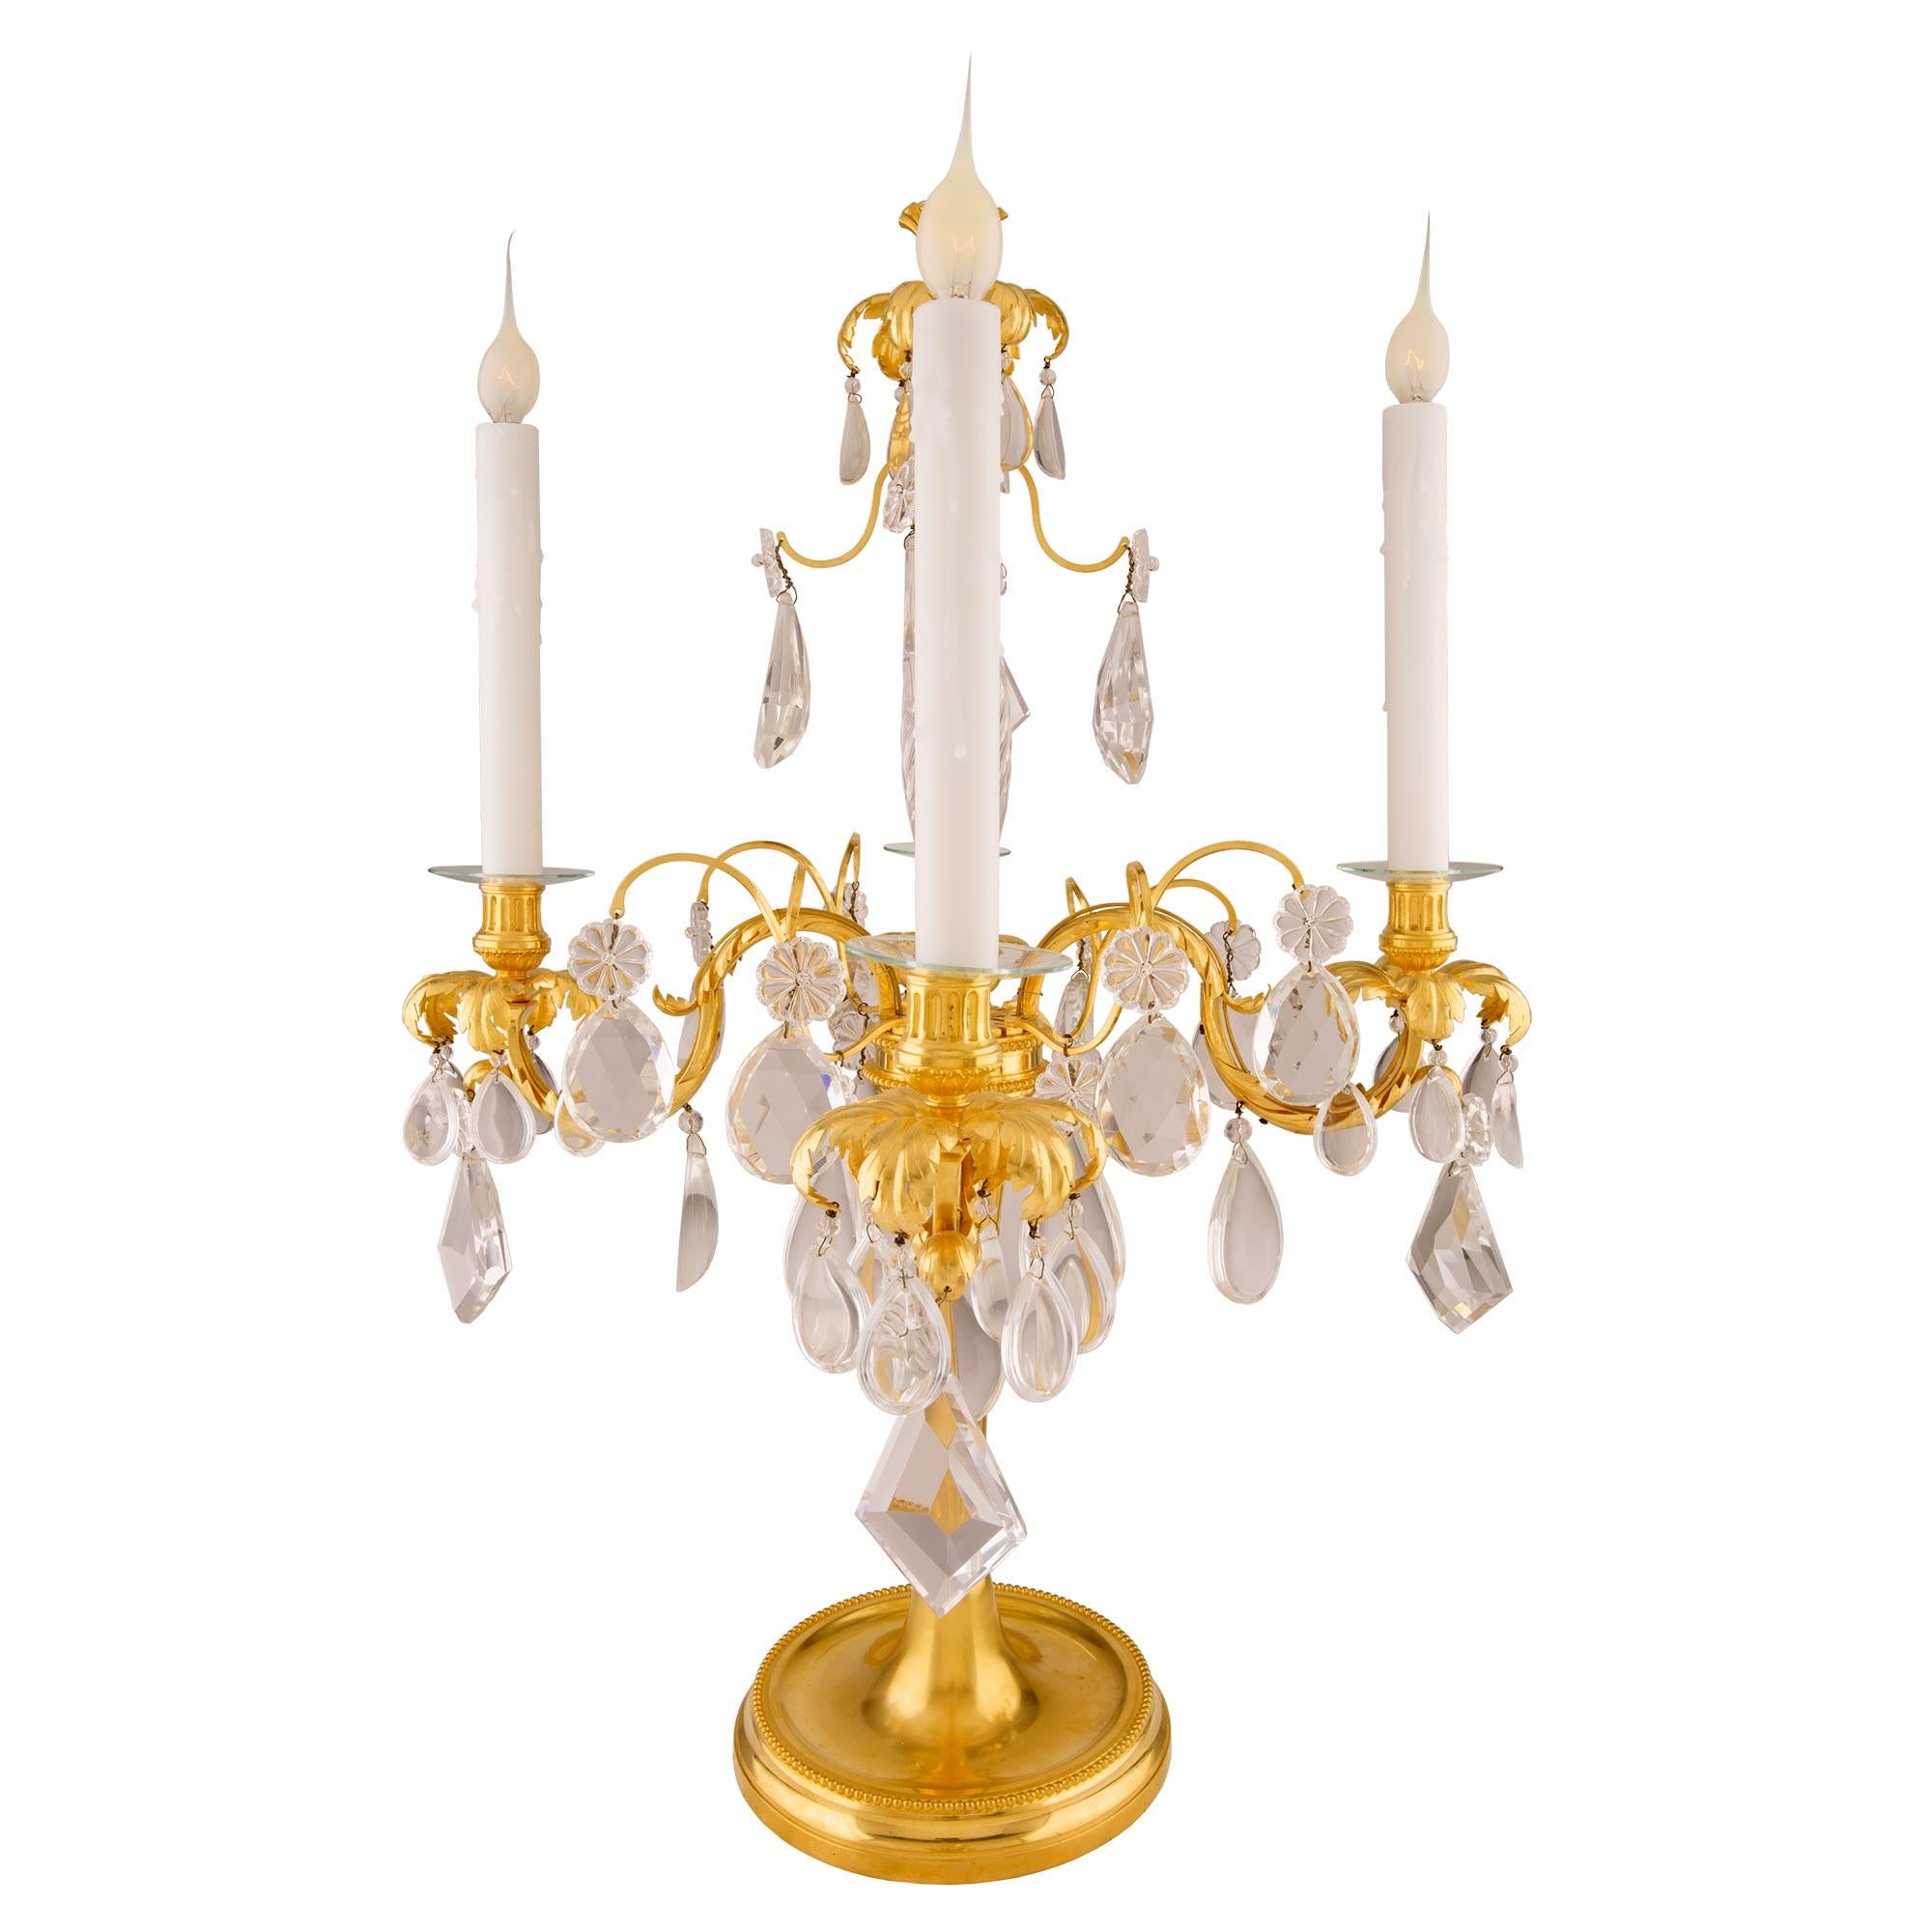 A magnificent pair of French mid 19th century Louis XVI st. ormolu and Baccarat crystal four arm girandole lamps. Each girandole is raised by an elegant circular mottled base with a mottled border and a Fine wrap around beaded band. The elegantly